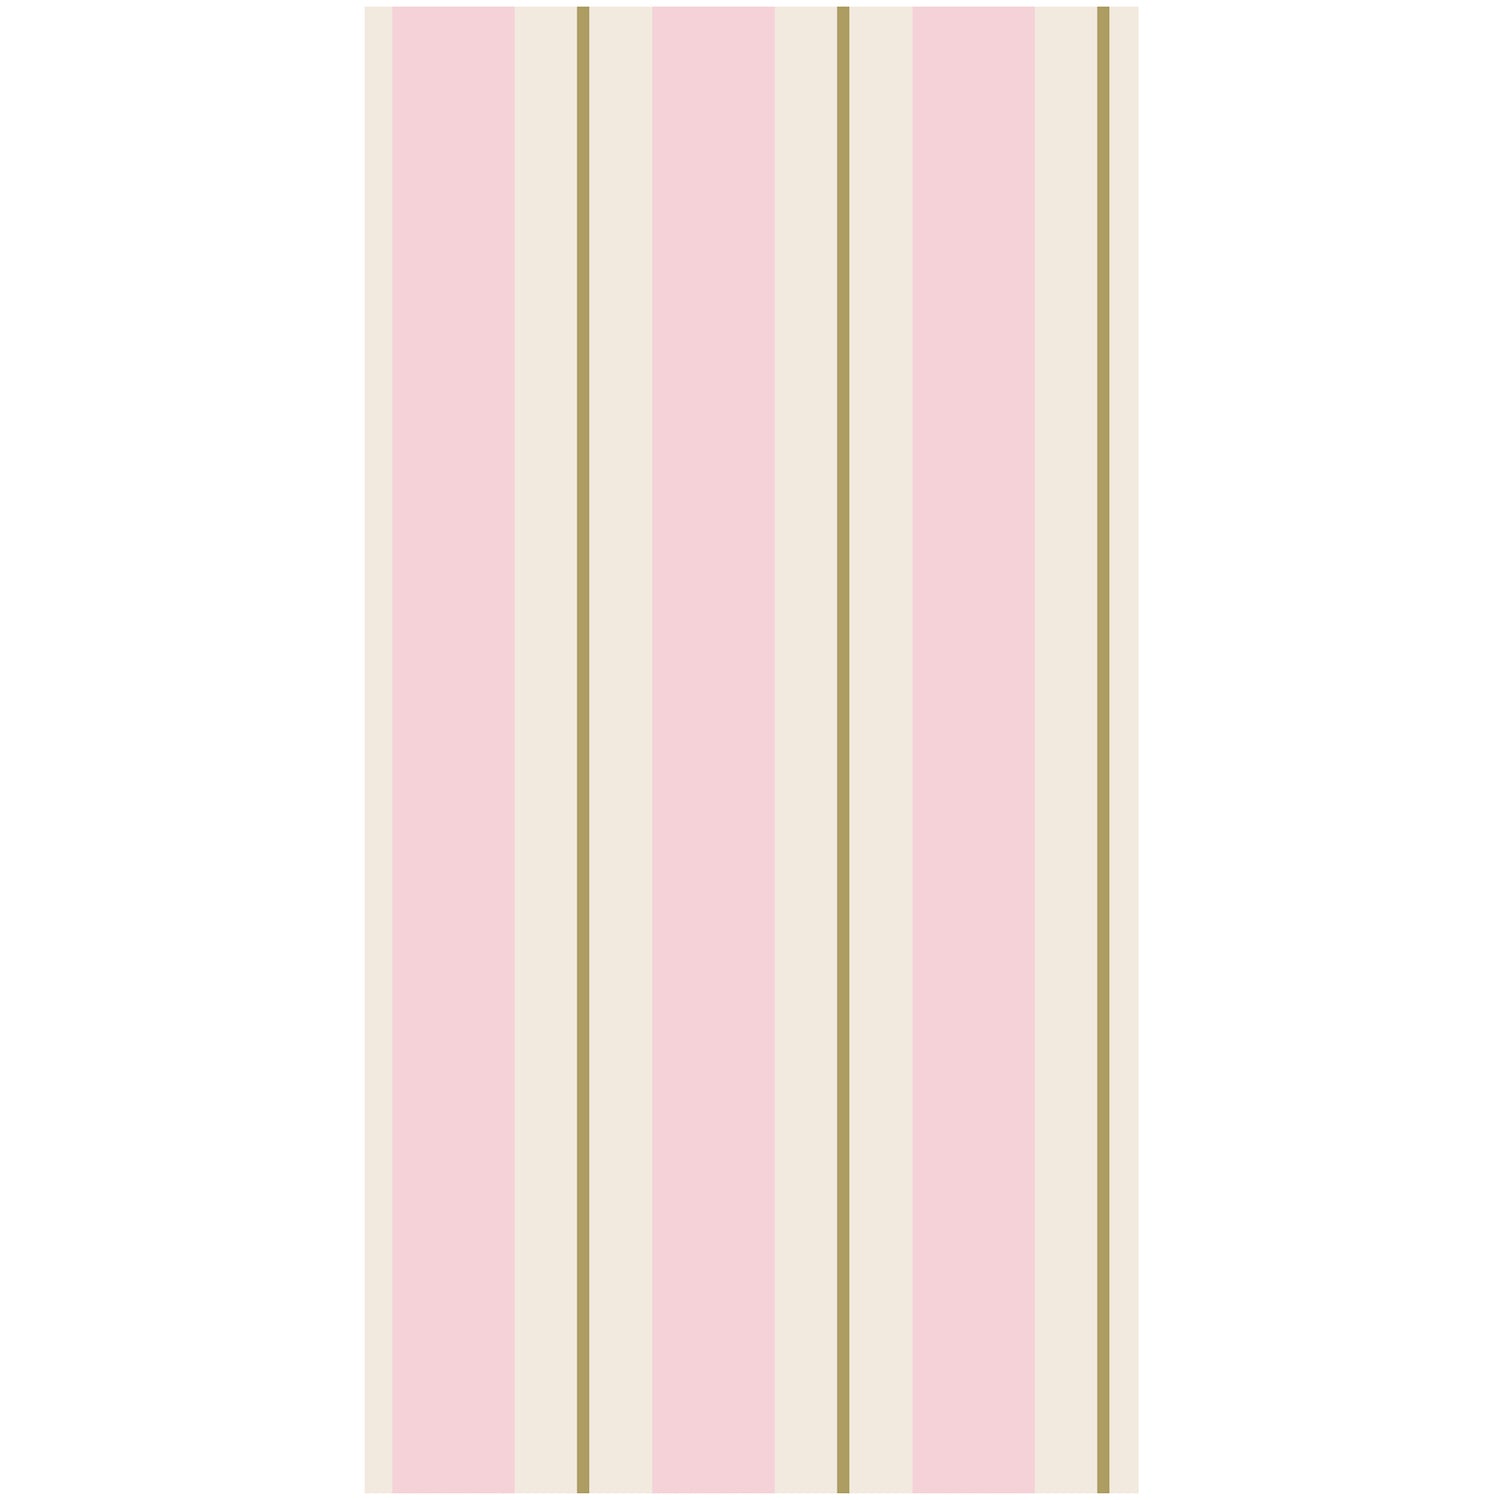 A rectangle guest napkin featuring vertical pink and white stripes, with a gold line running down the center of each white stripe.